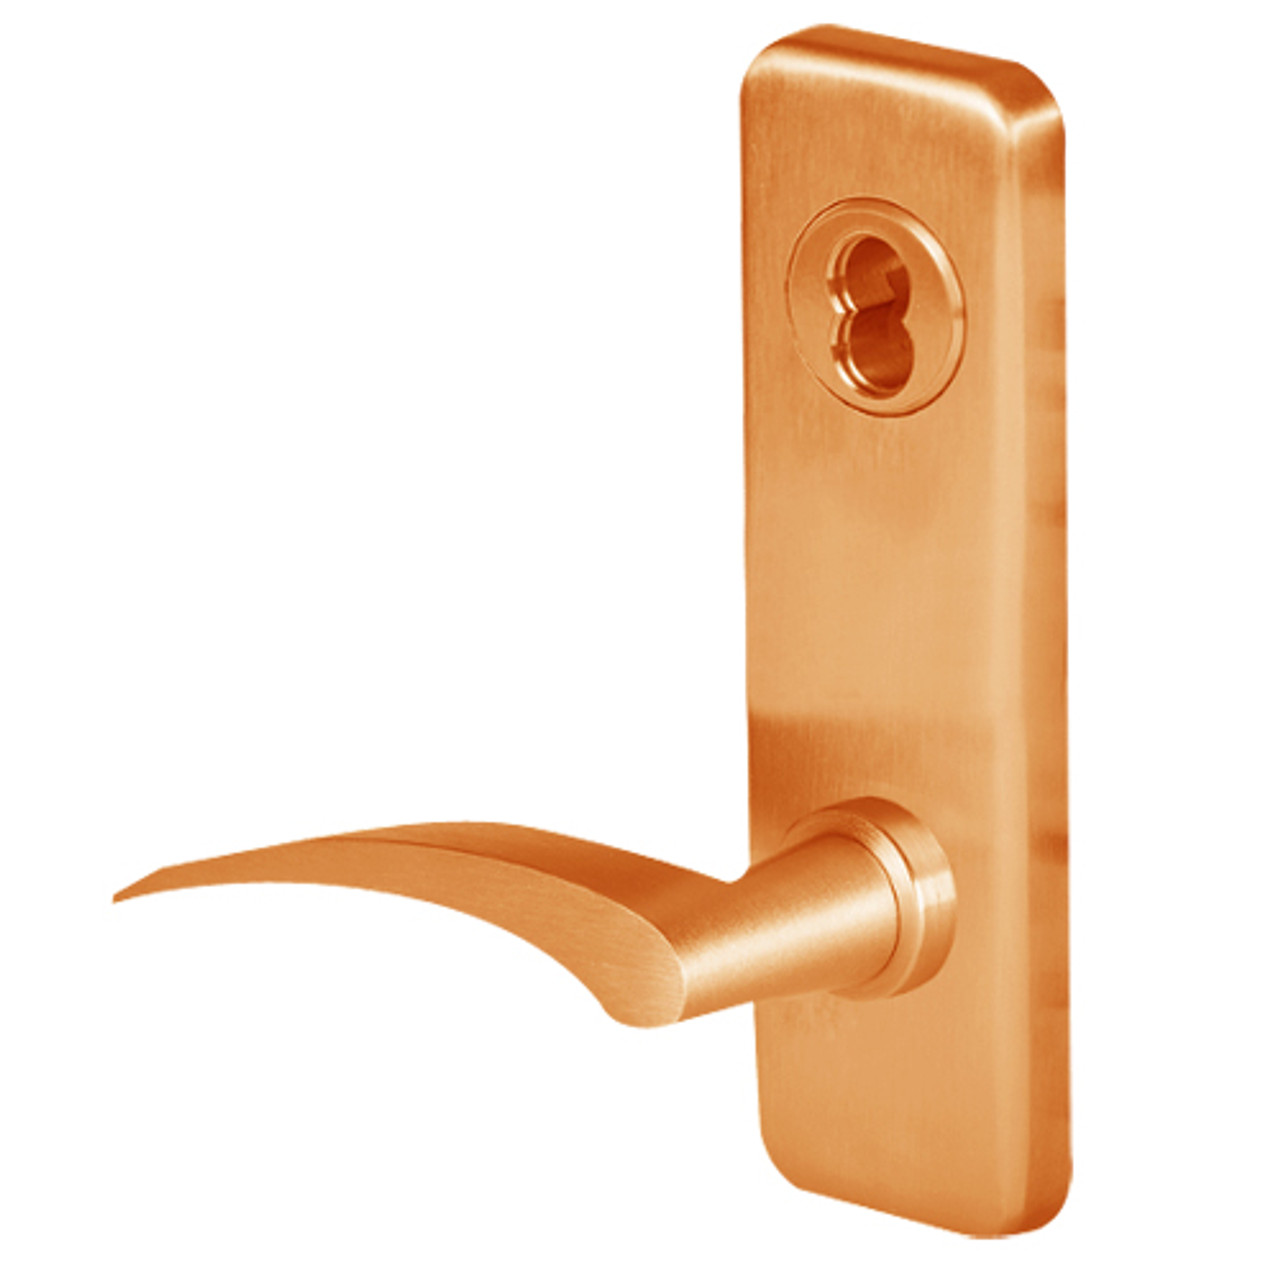 45H0LB17RJ611 Best 40H Series Privacy with Deadbolt Heavy Duty Mortise Lever Lock with Gull Wing RH in Bright Bronze